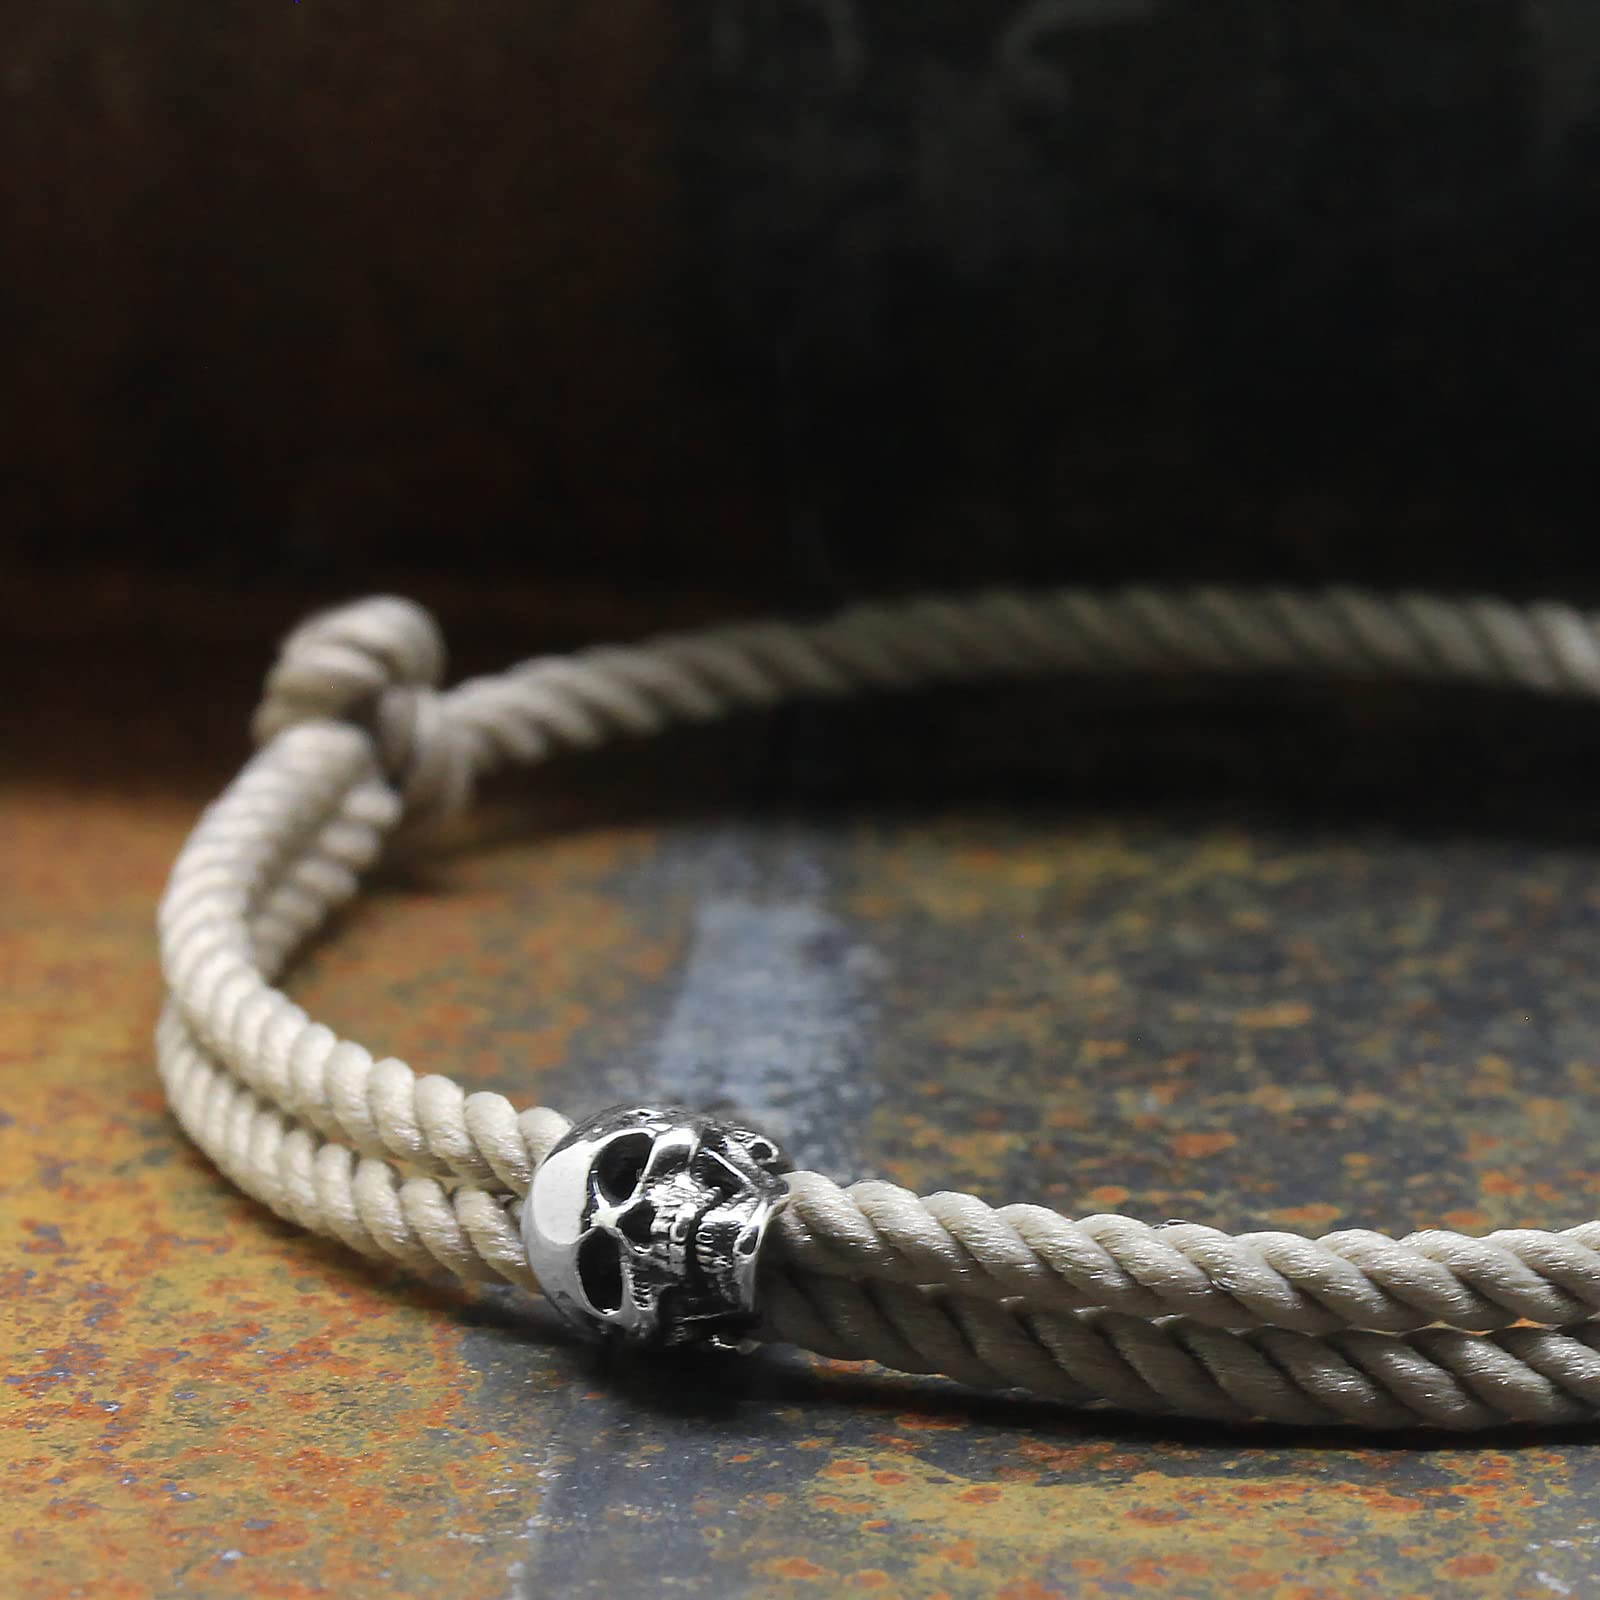 Nato Cuff - Sterling Silver Skull Bracelet - Milanese Silk Cord - Handmade in France Mens and Womens Jewelry